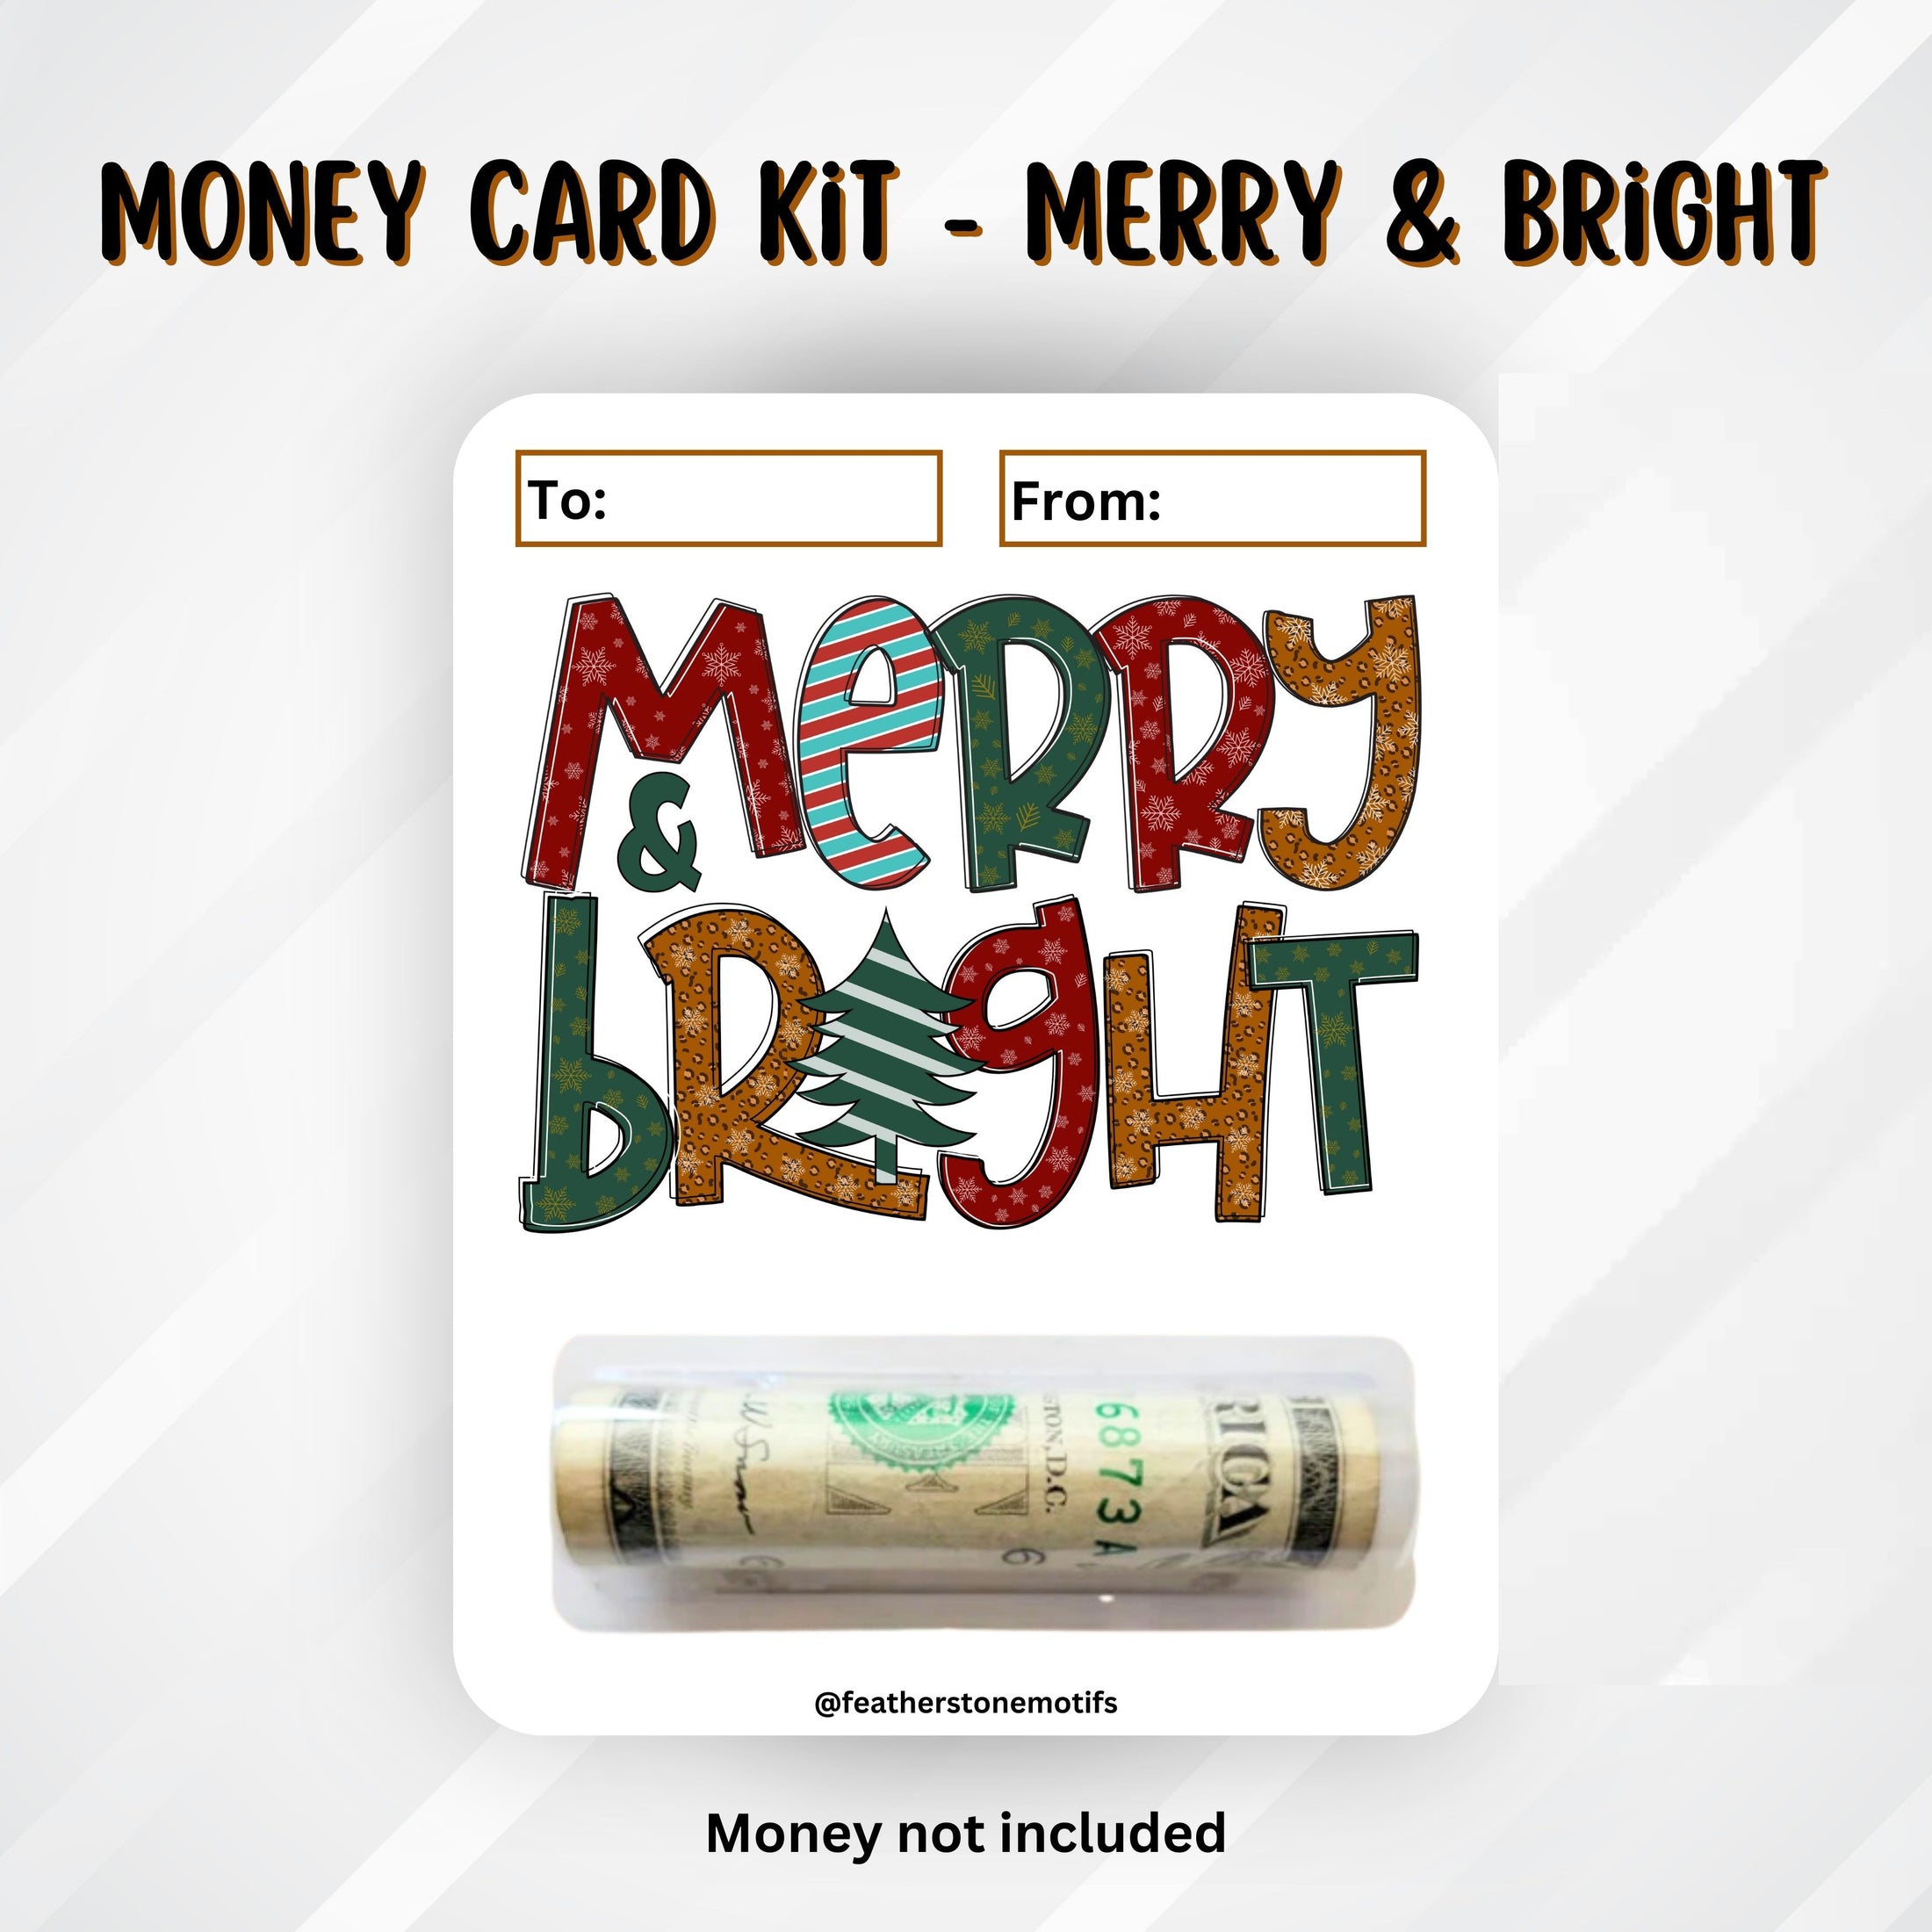 This image shows the money tube attached to the Merry & Bright Money Card.